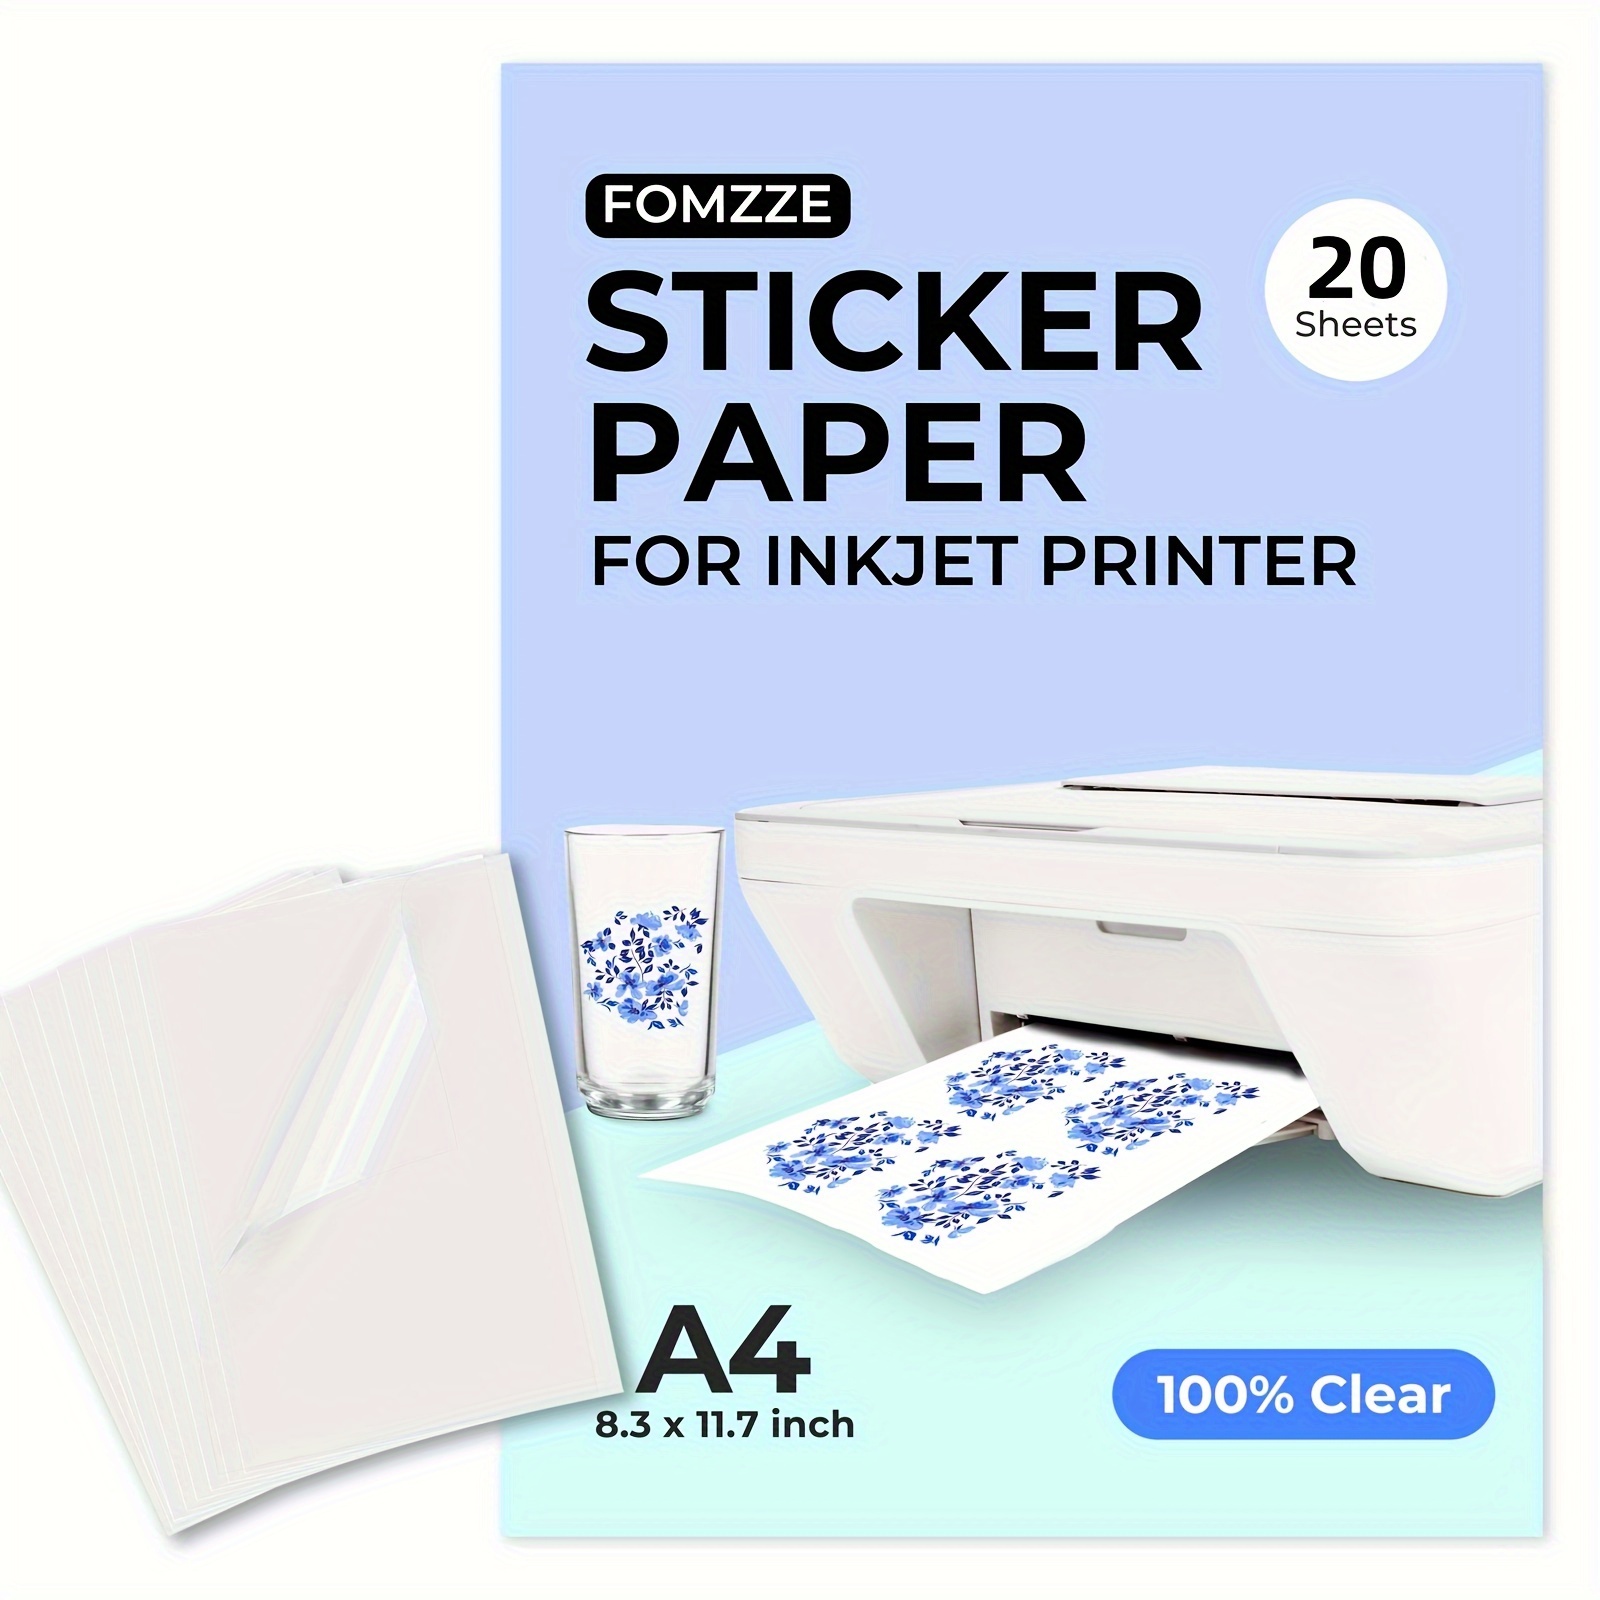 Printable Vinyl Sticker Paper for Inkjet Printer - Frosty Clear -  Semi-Transparent -15 Self-Adhesive Sheets - Waterproof Decal Paper -  Standard Letter Size 8.5x11 